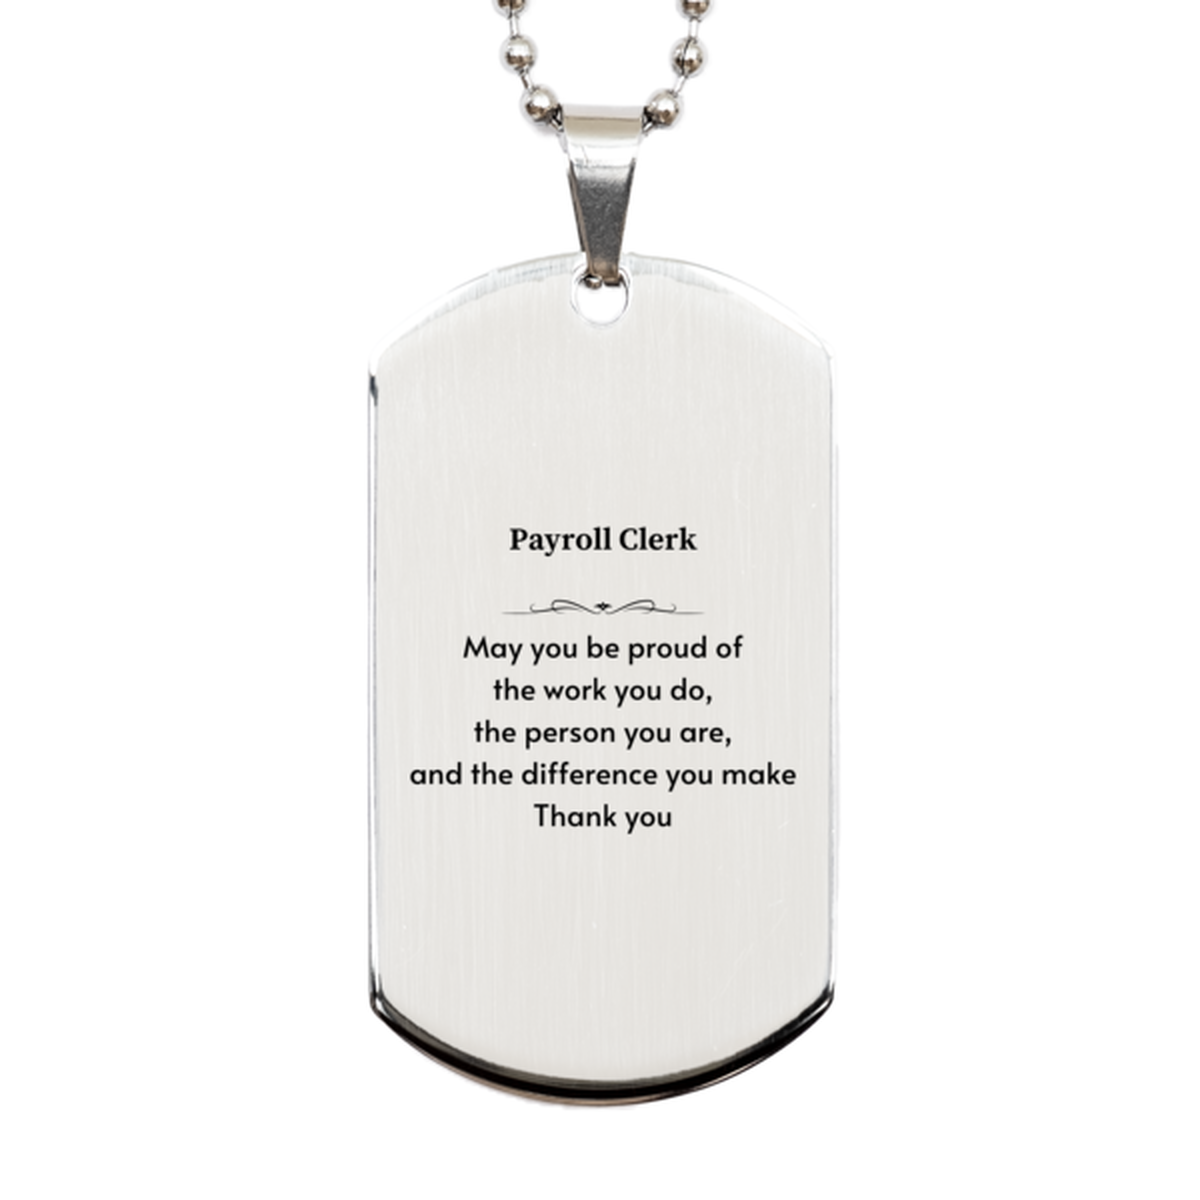 Heartwarming Silver Dog Tag Retirement Coworkers Gifts for Payroll Clerk, Payroll Clerk May You be proud of the work you do, the person you are Gifts for Boss Men Women Friends